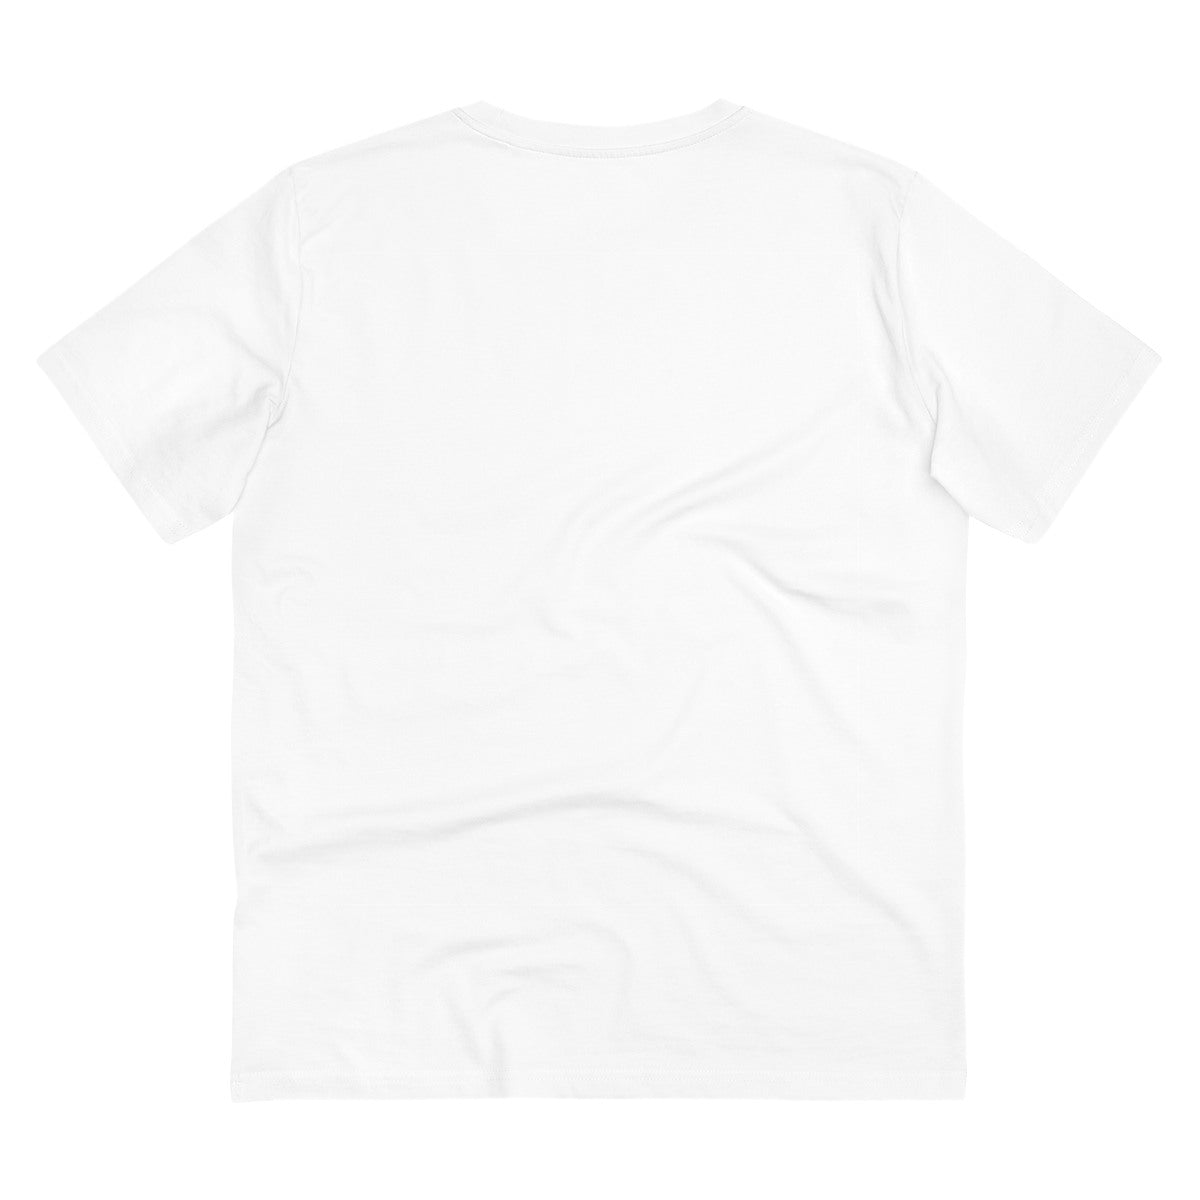 Men's PC Cotton 50th Birthday Printed T Shirt (Color: White, Thread Count: 180GSM) - GillKart